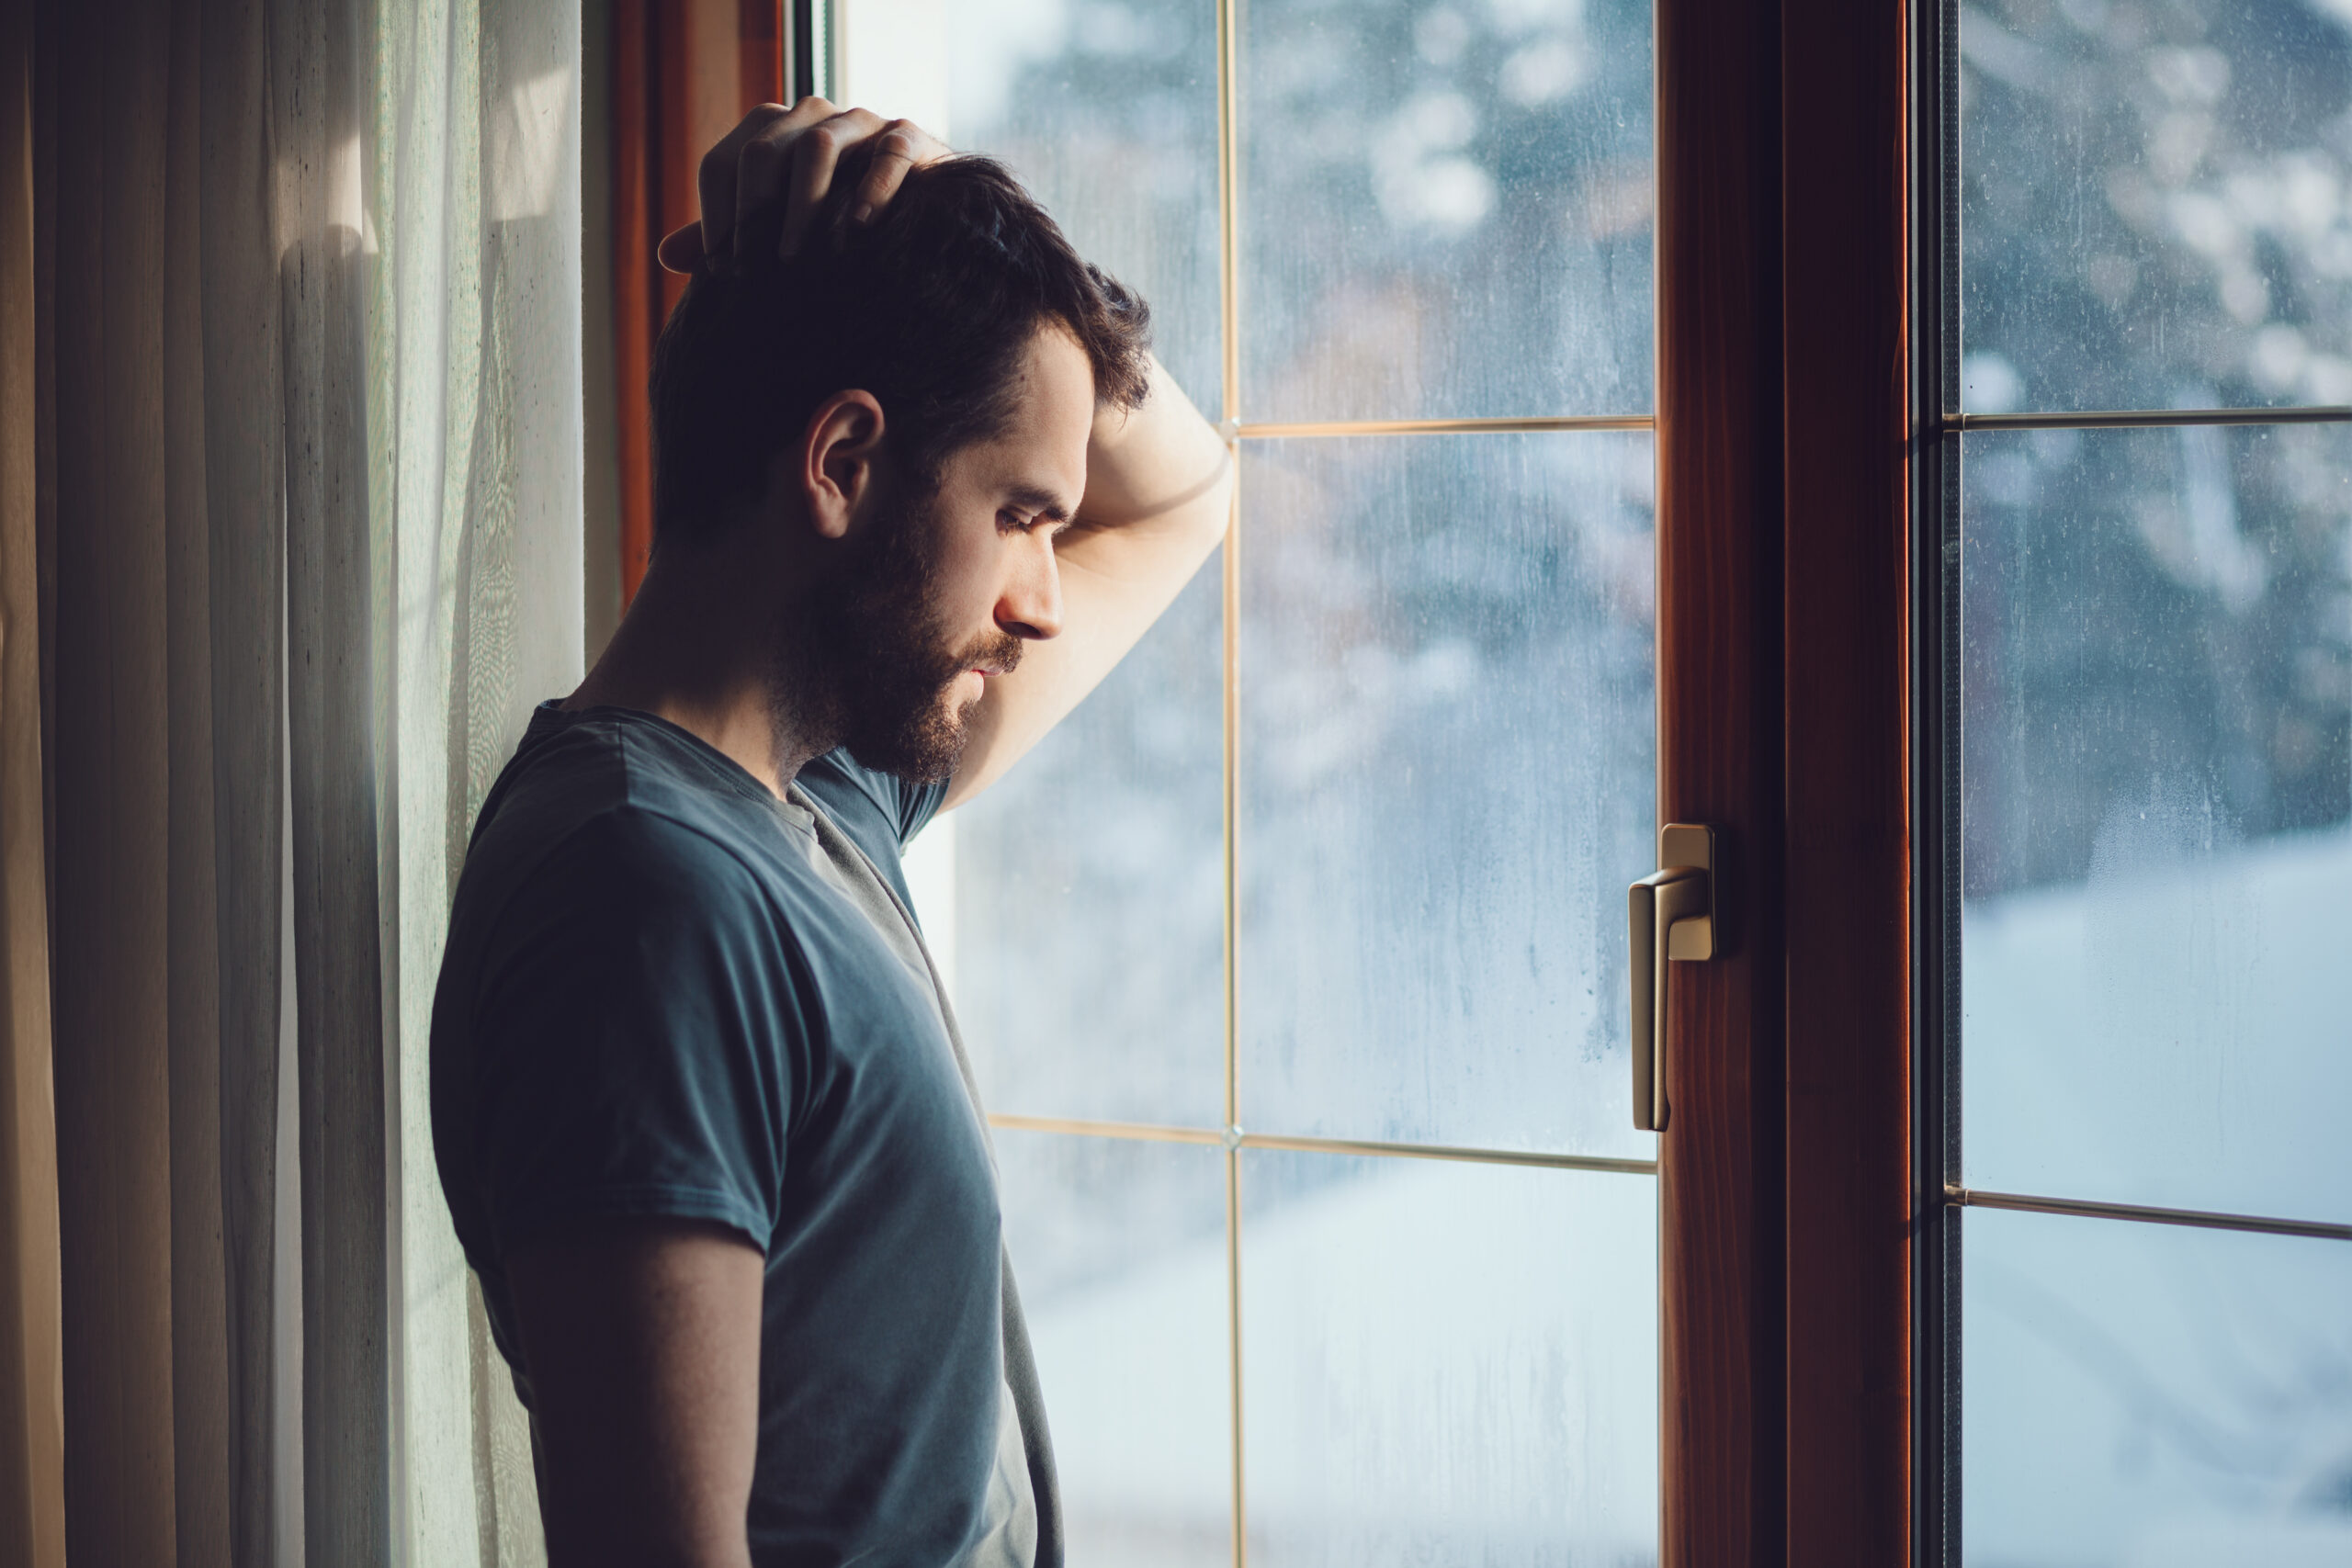 A man looks out a window, appearing sad or frustrated.